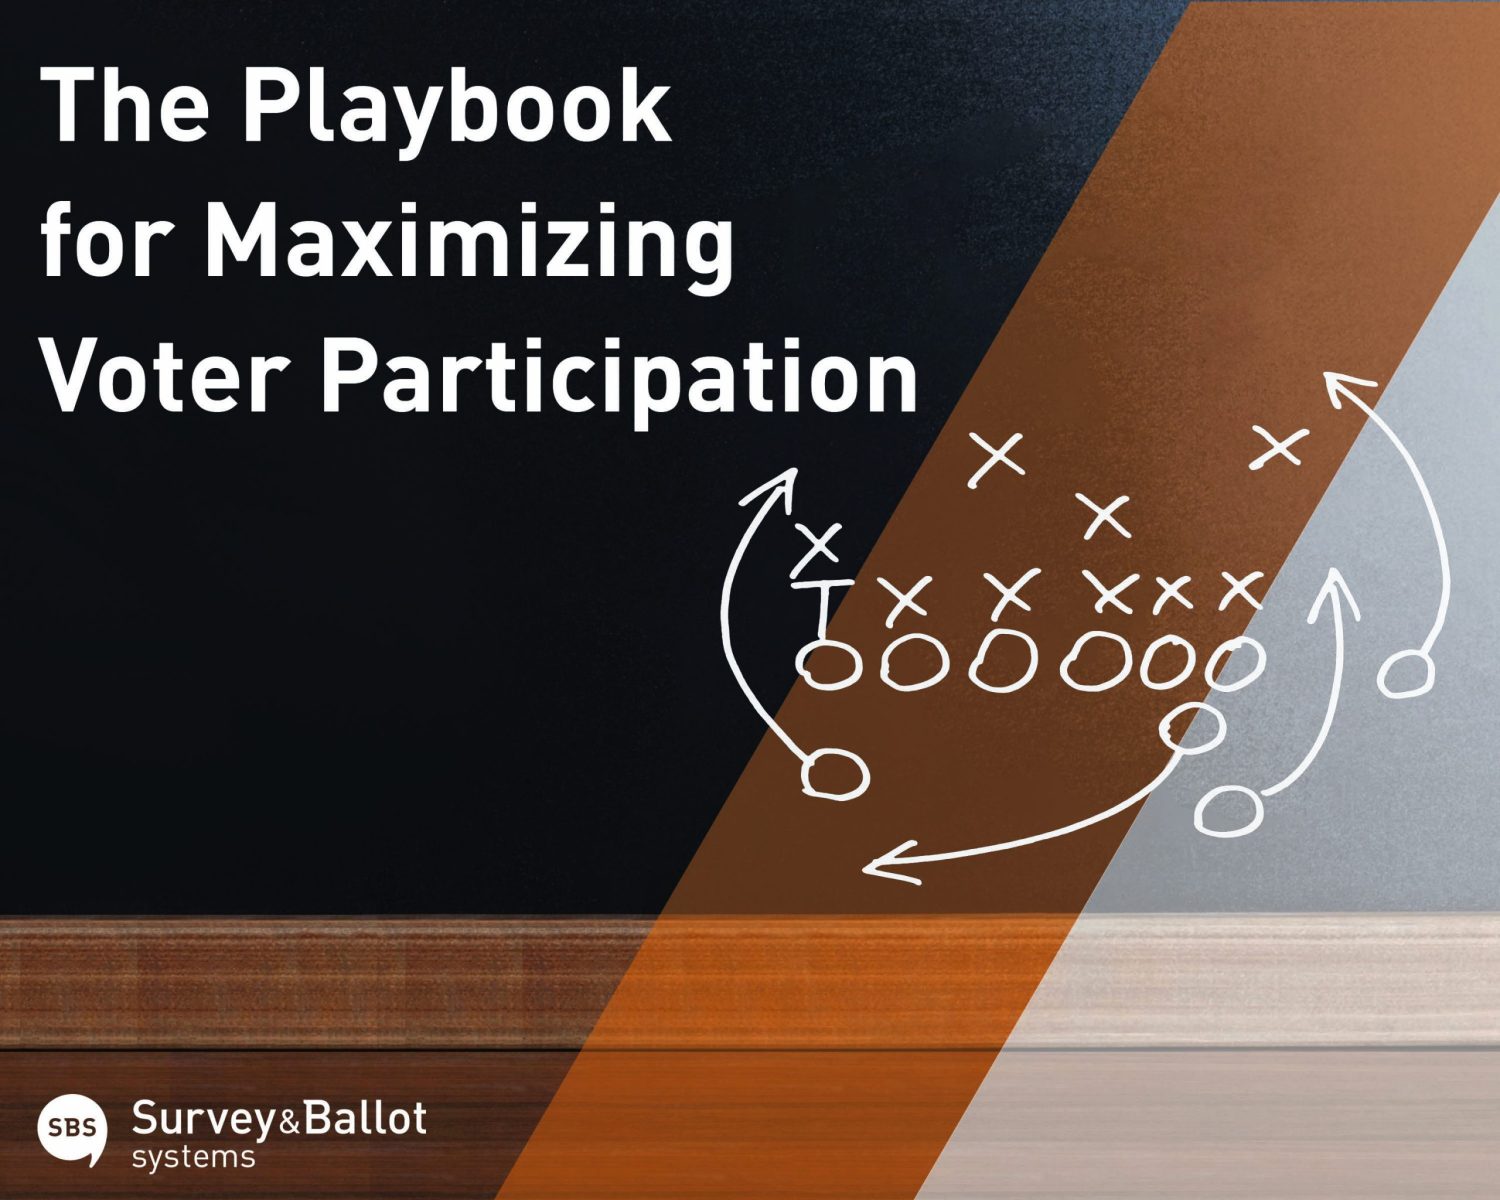 a poster for the playbook for maximizing voter participation